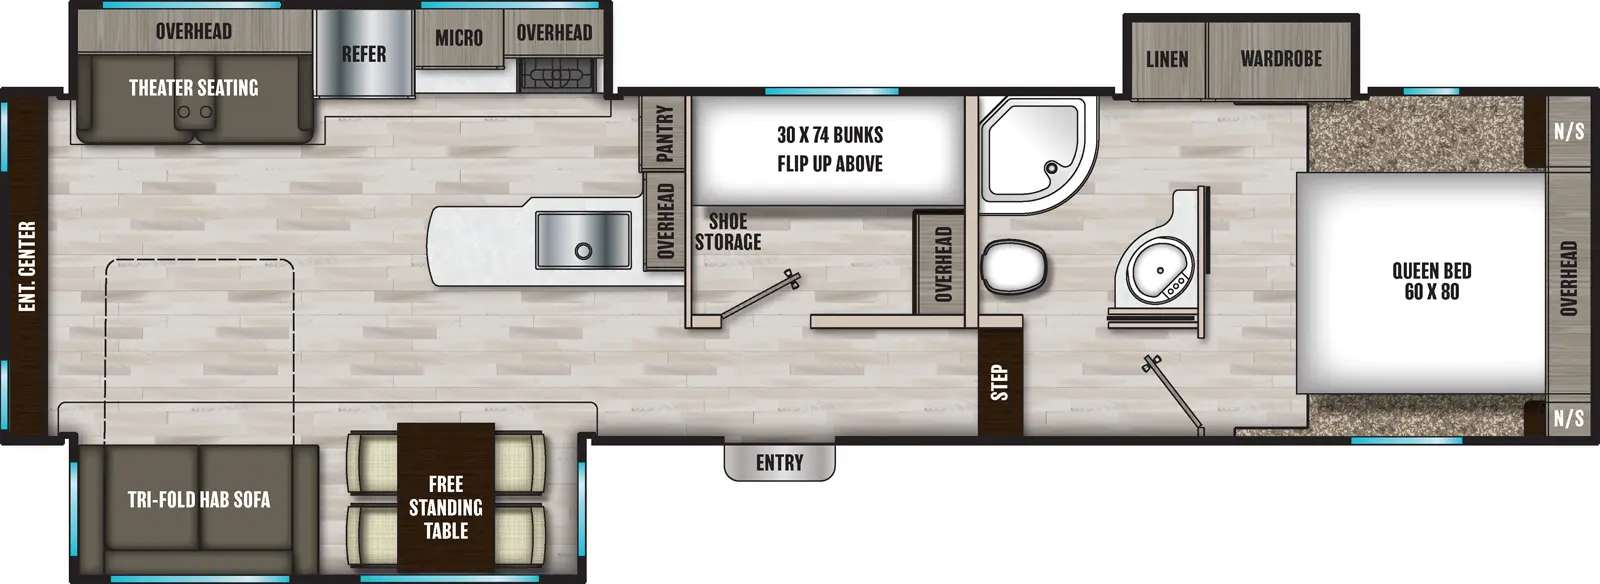 The 30BHS has three slide outs and one entry. Interior layout front to back: front bedroom with a foot facing queen bed, overhead cabinet, night stands on each side, and off-door side slideout with wardrobe and linen cabinet; off-door side 2-entry bathroom; step down to the off-door side bunk room with overhead storage, shoe storage, and bunks with top bunk flip-up; entry door across from bunk room; off-door side peninsula kitchen counter that wraps from the middle of the unit to the inner wall with overhead cabinet and pantry; off-door side slideout with overhead cabinet, microwave, refrigerator, and theater seating with overhead cabinet; door side slideout with free-standing table and tri-fold hide-a-bed sofa; rear entertainment center.